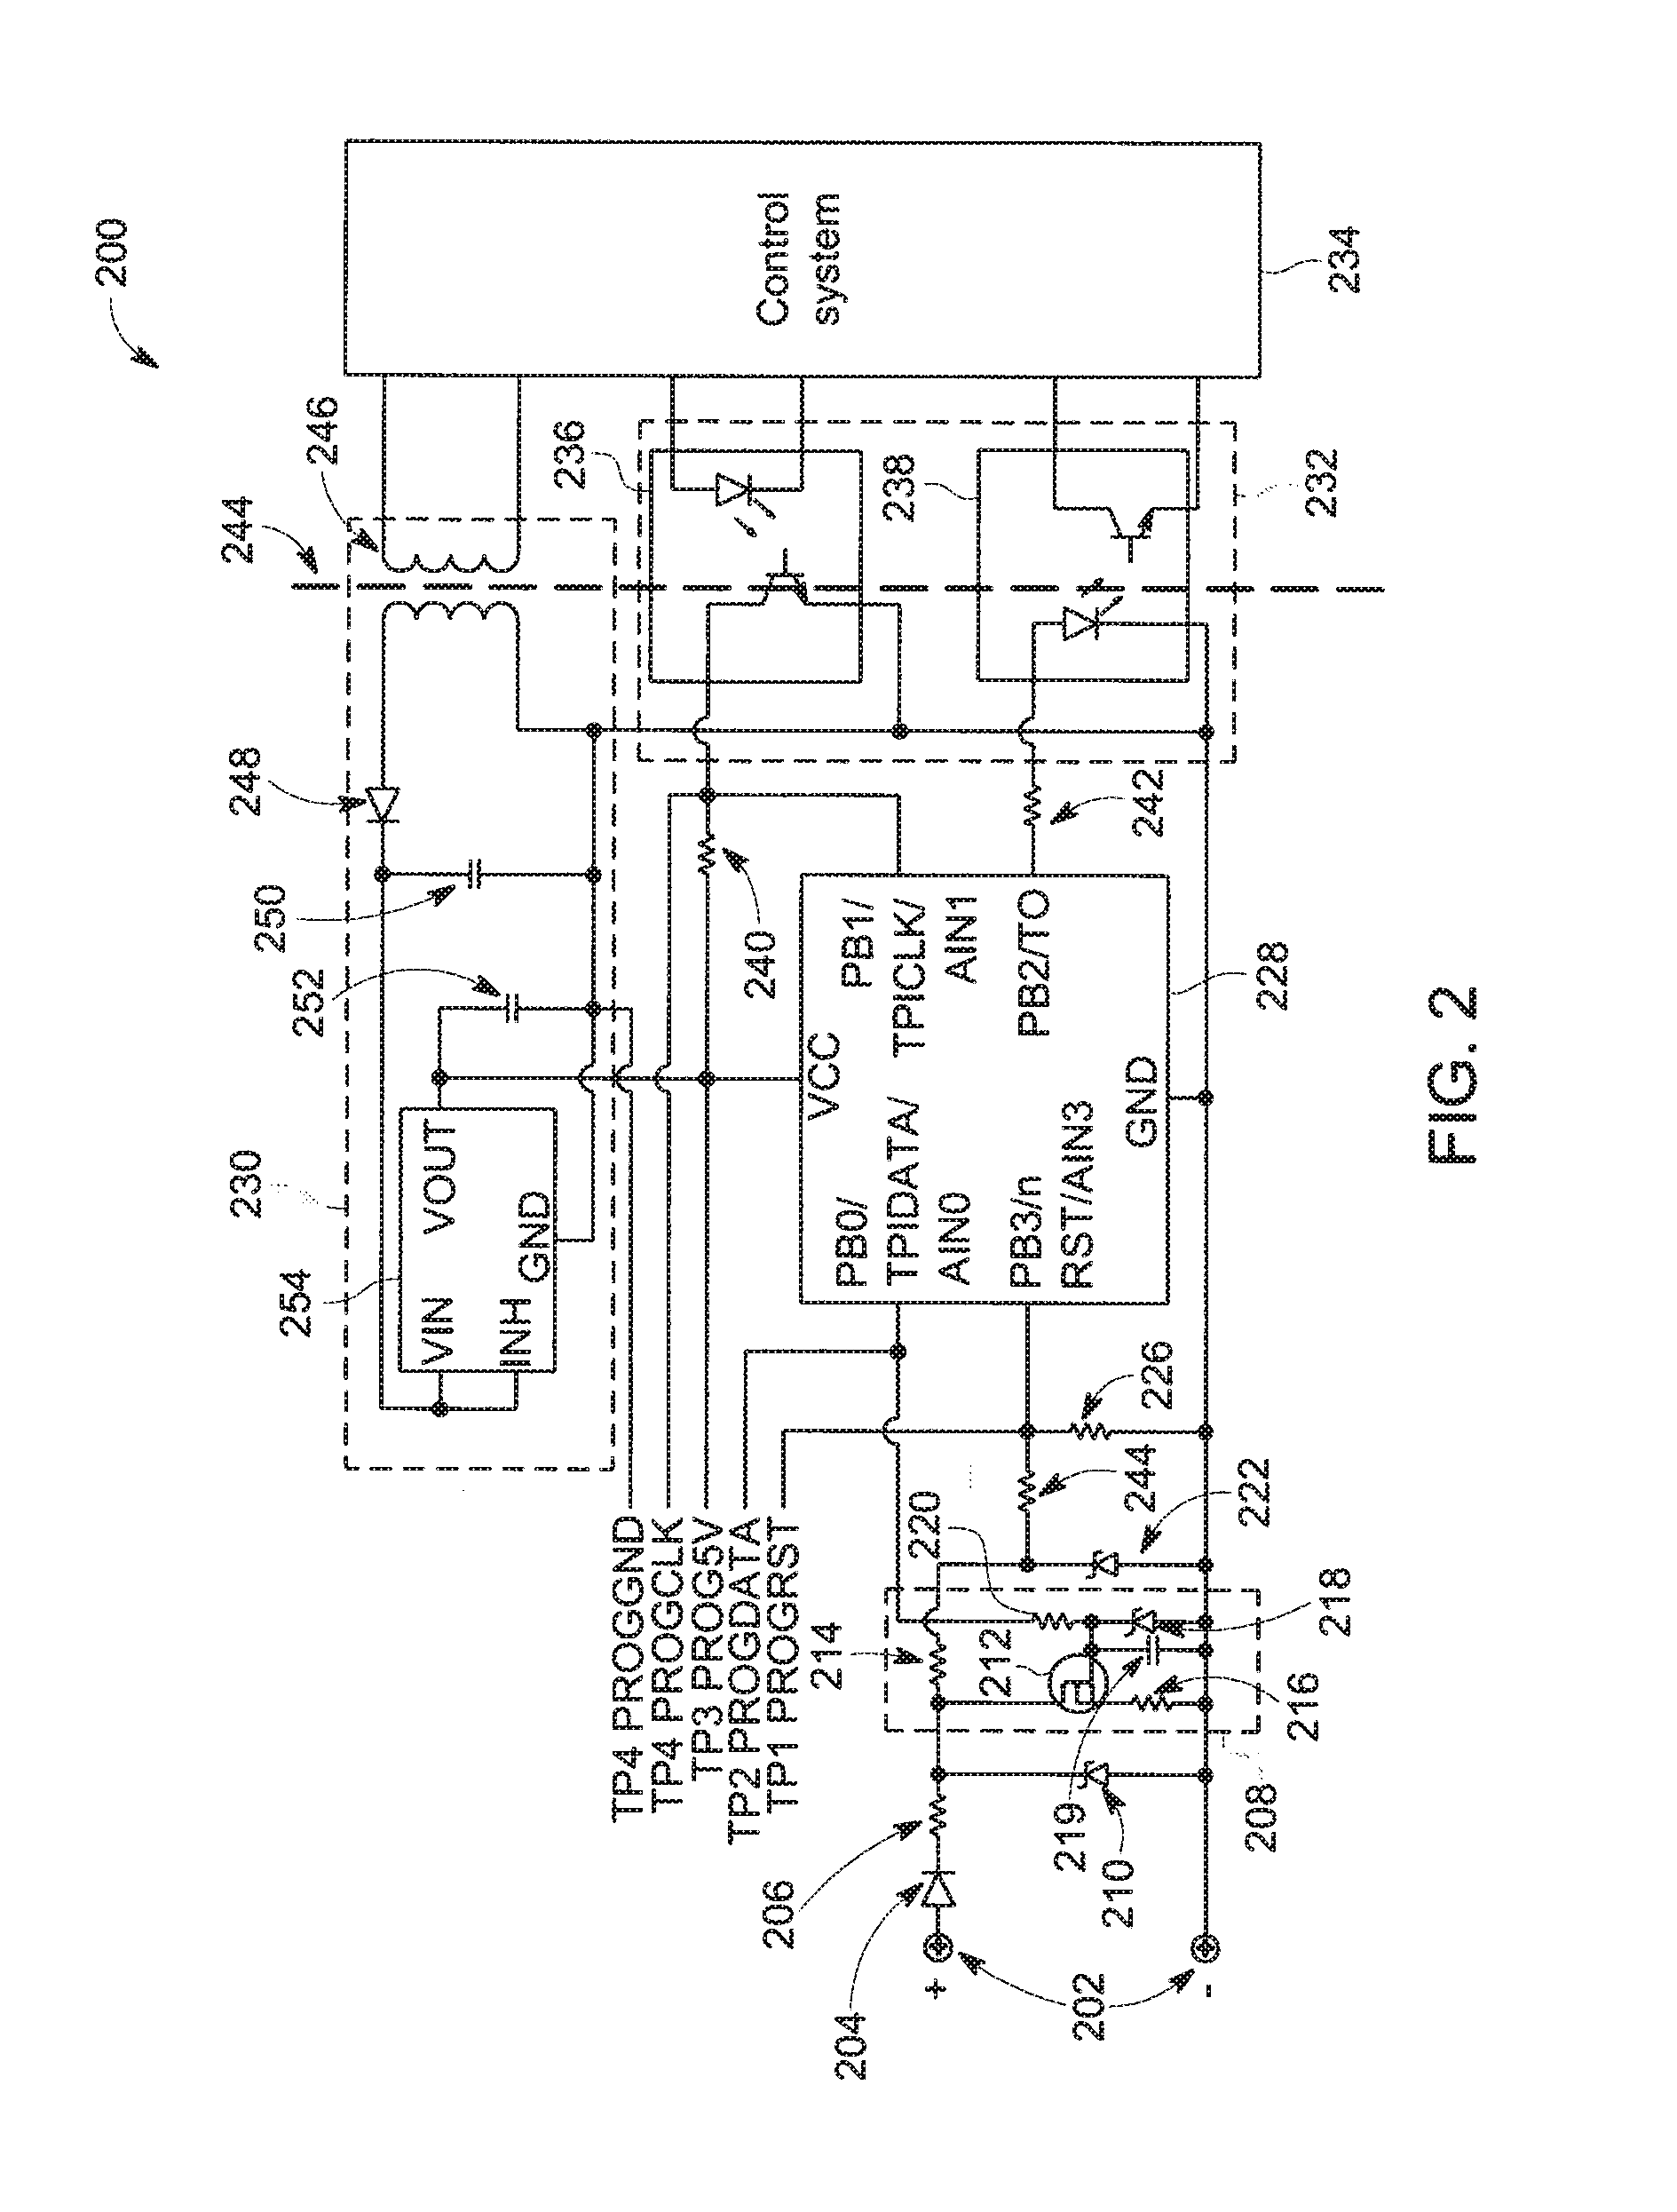 Programmable contact input apparatus and method of operating the same